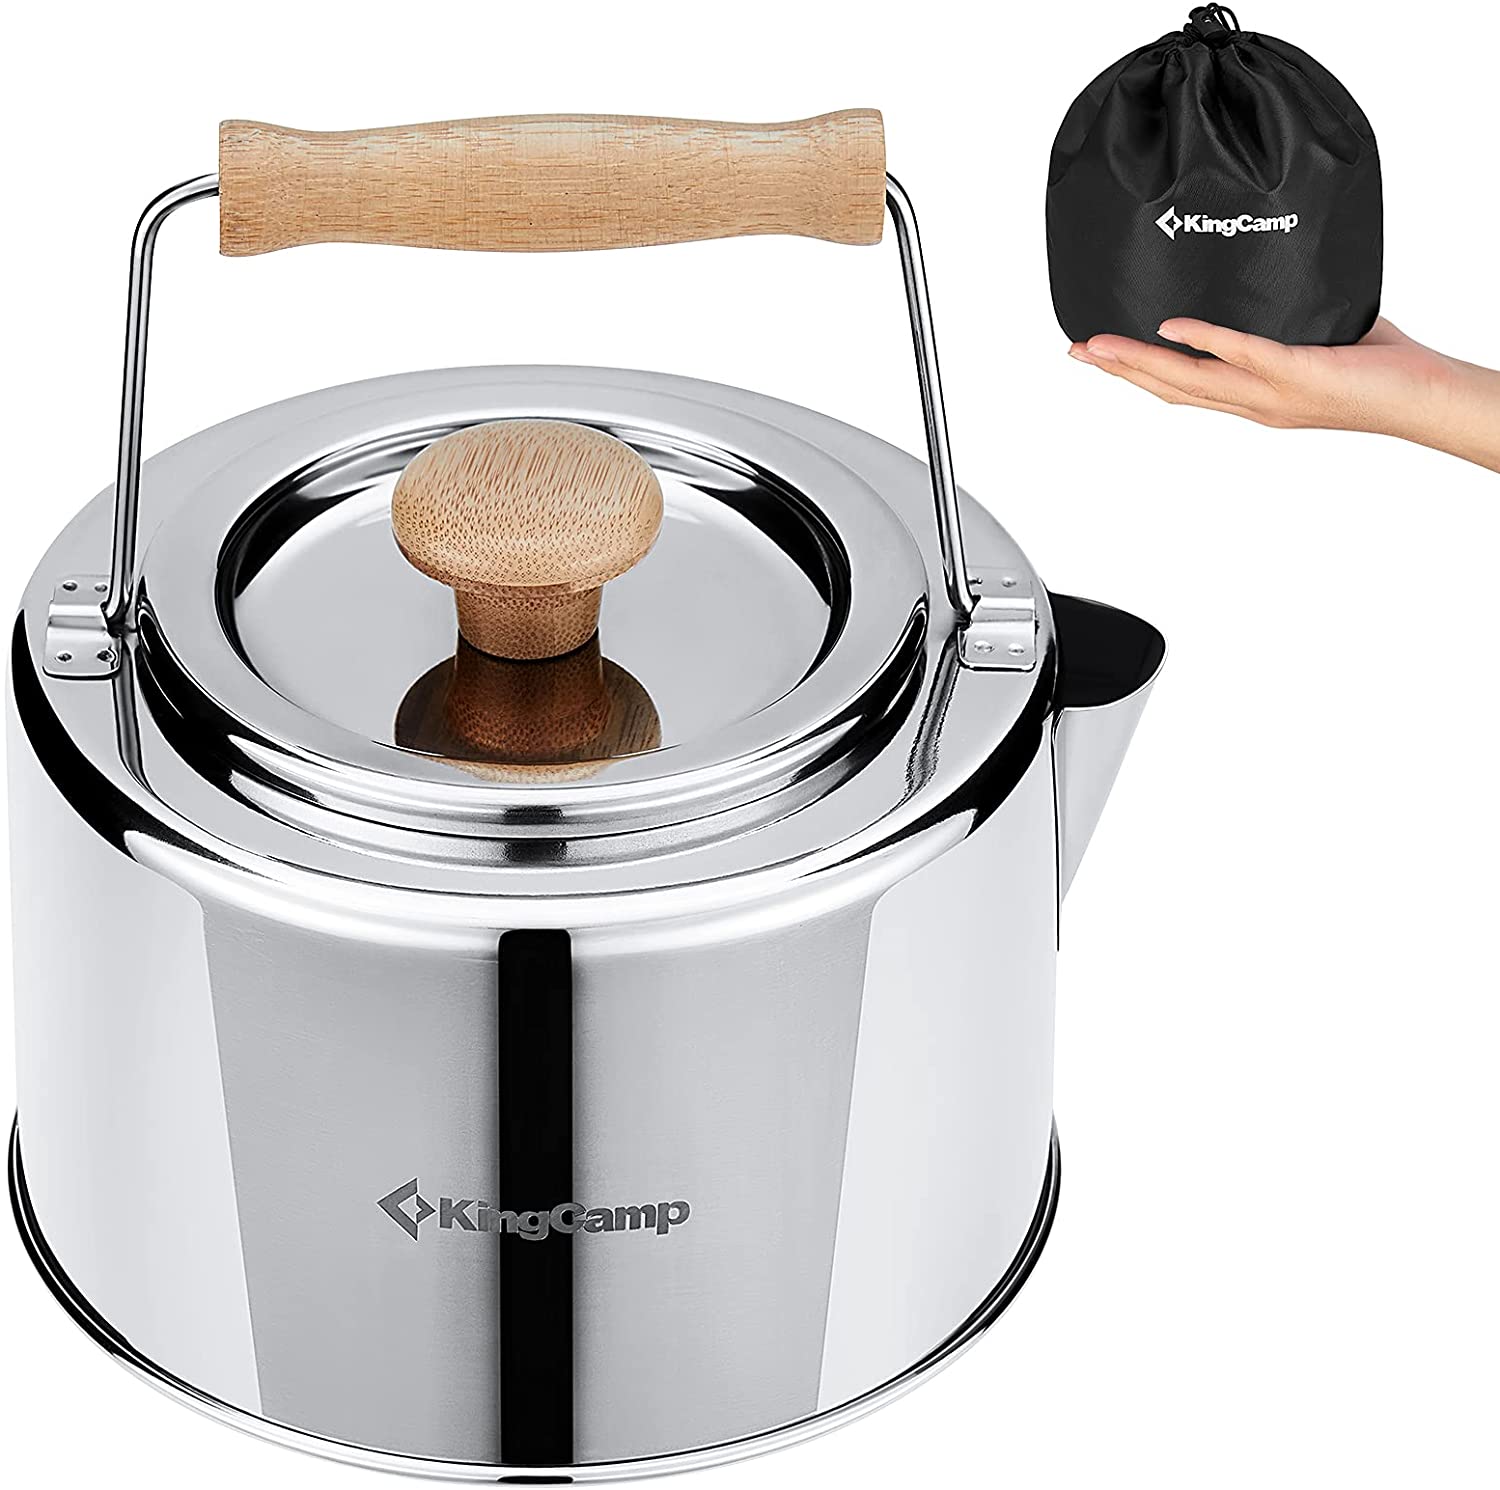 stainless steel King Camp brand tea kettle with wooden handles